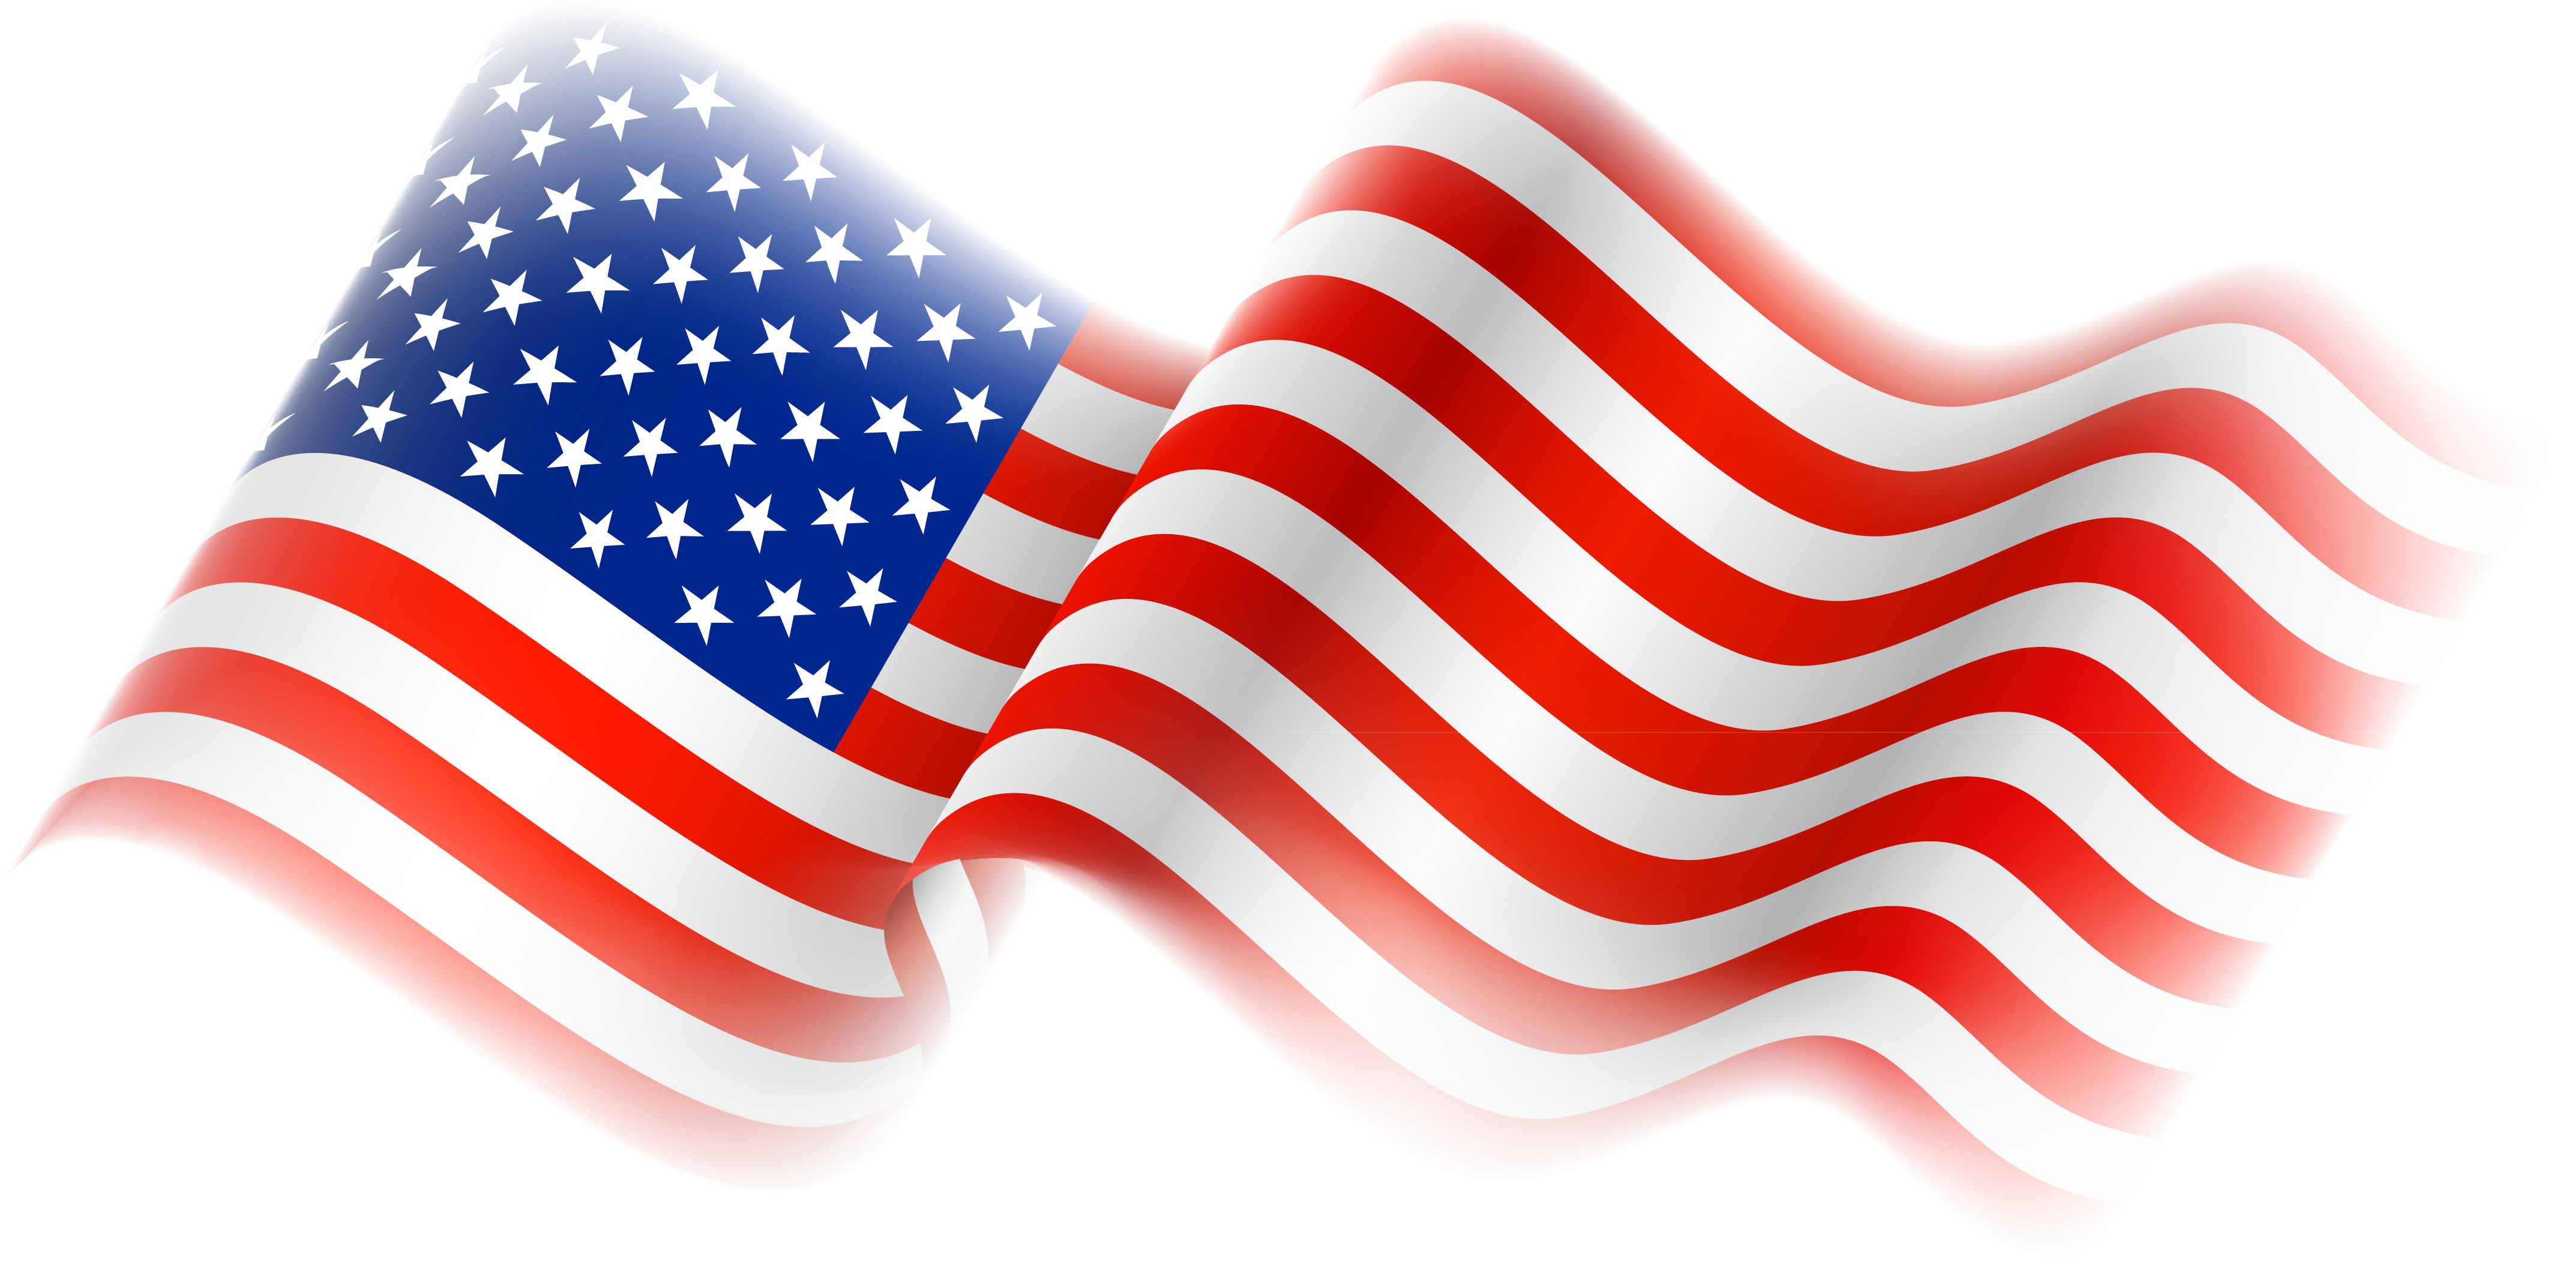 American Background Clipart - Enhance Your Projects with Patriotic Imagery